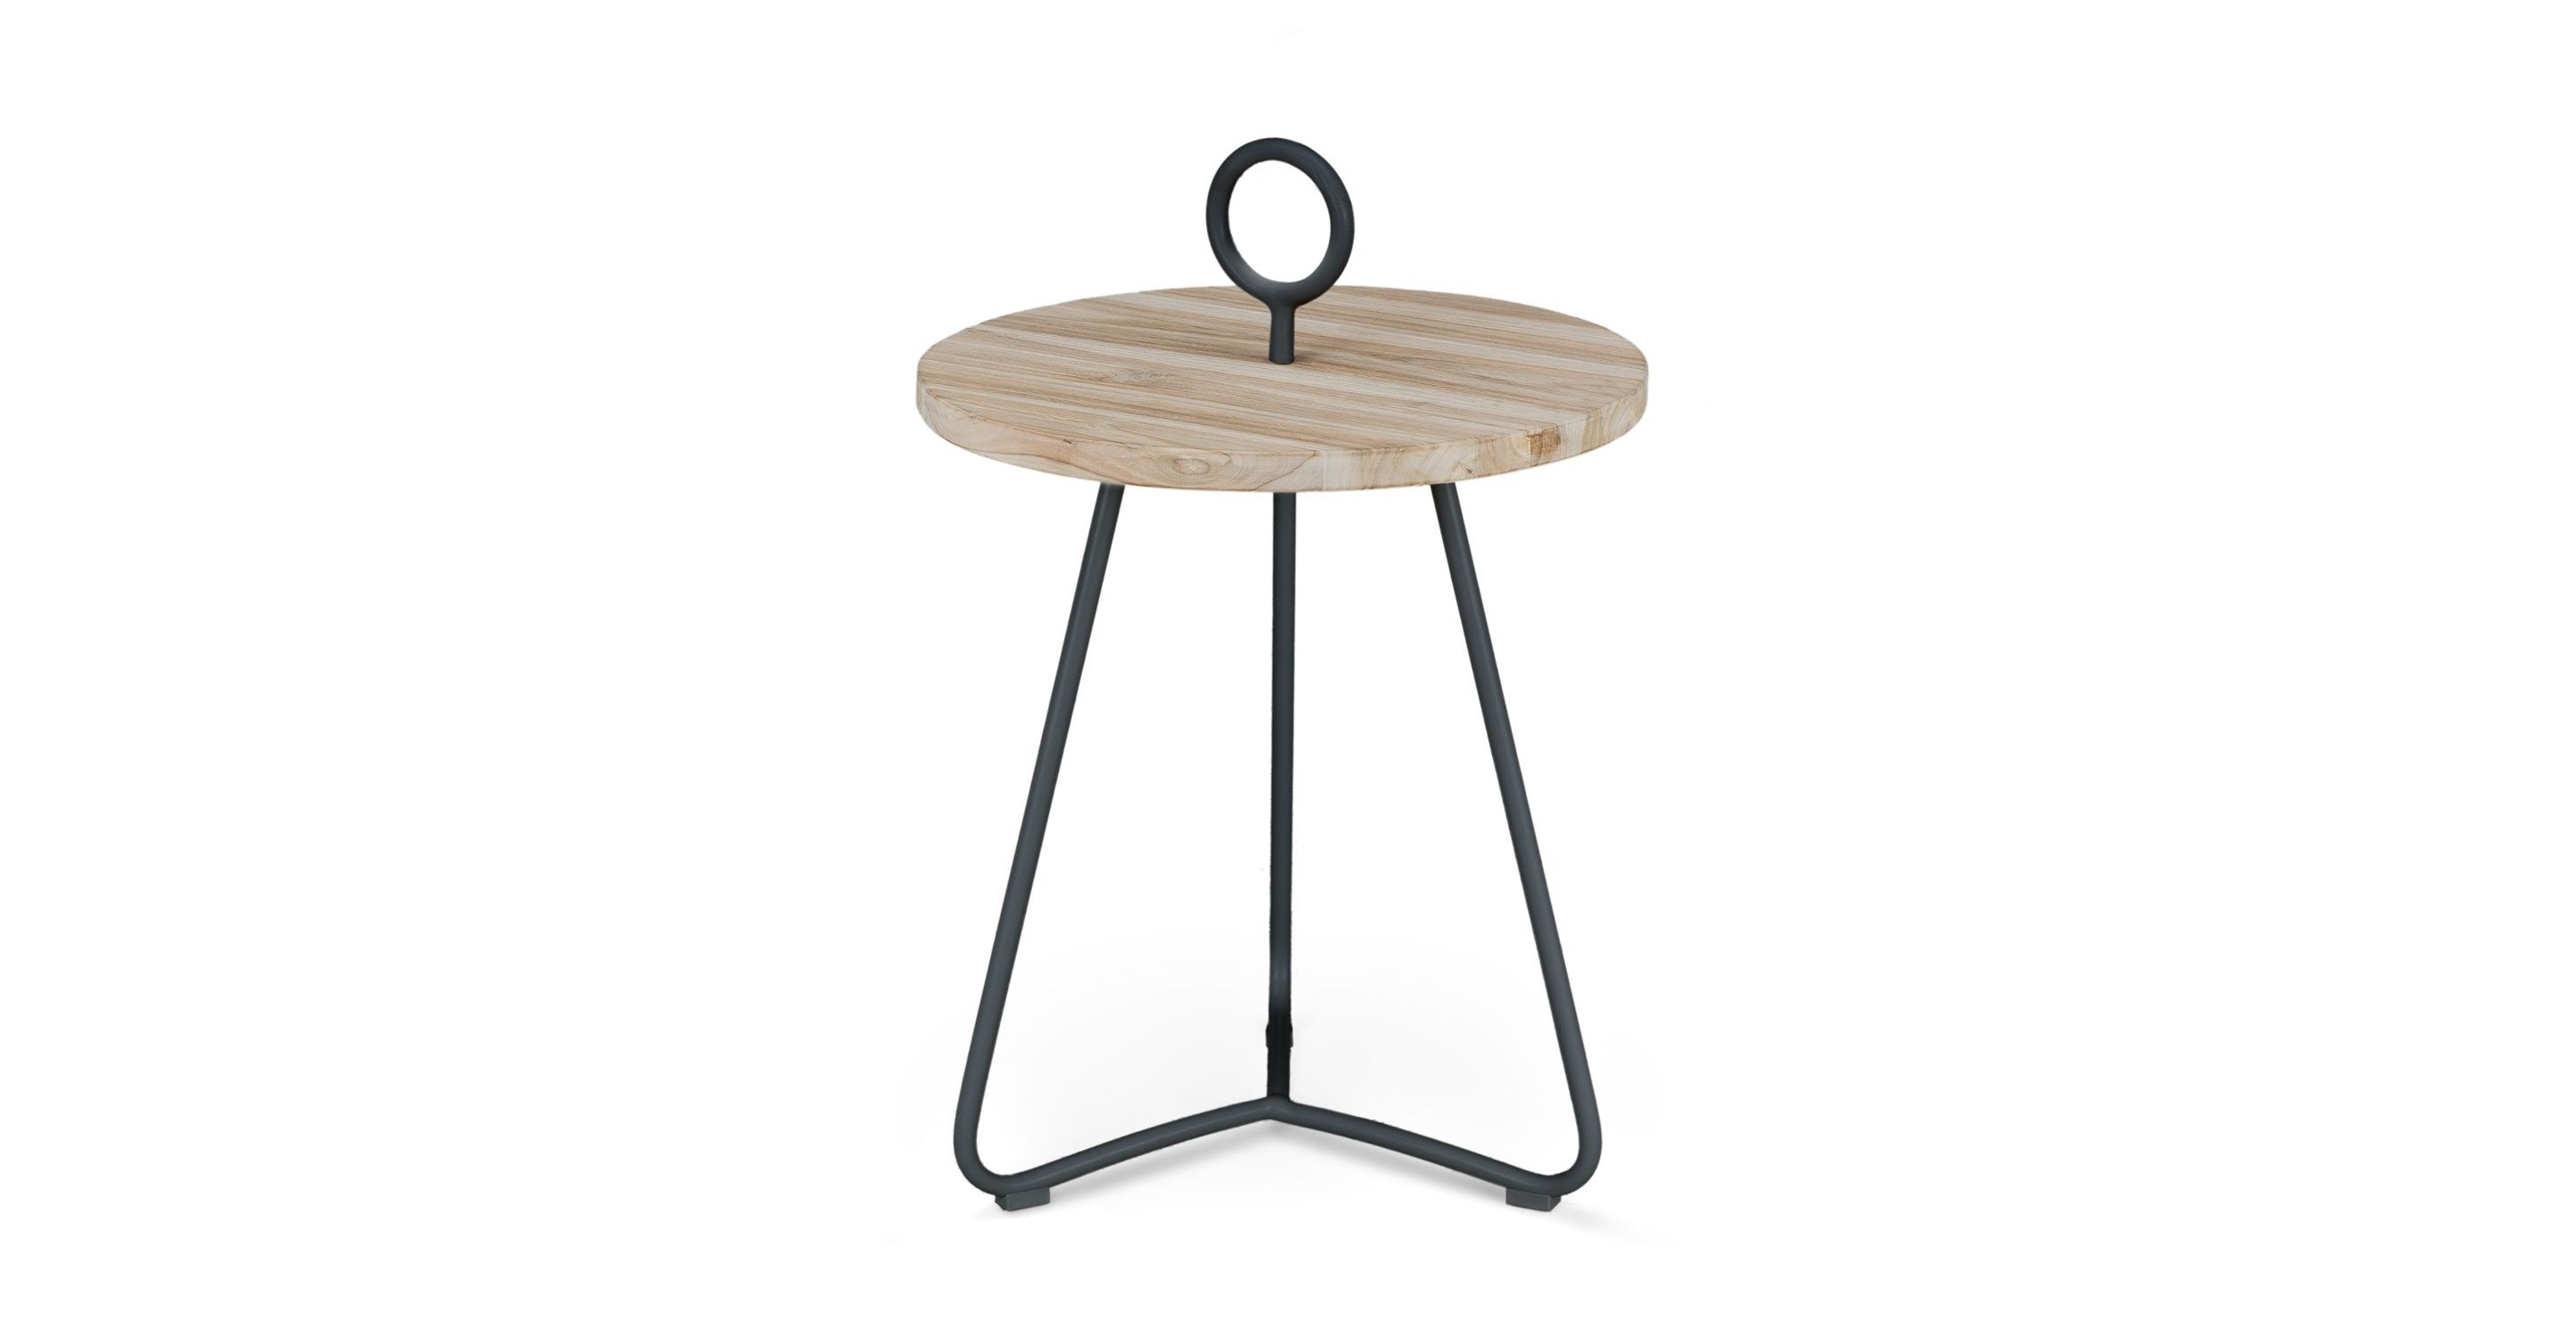 Teak Outdoor Side Table In Black Article Po Modern Outdoor throughout sizing 2890 X 1500